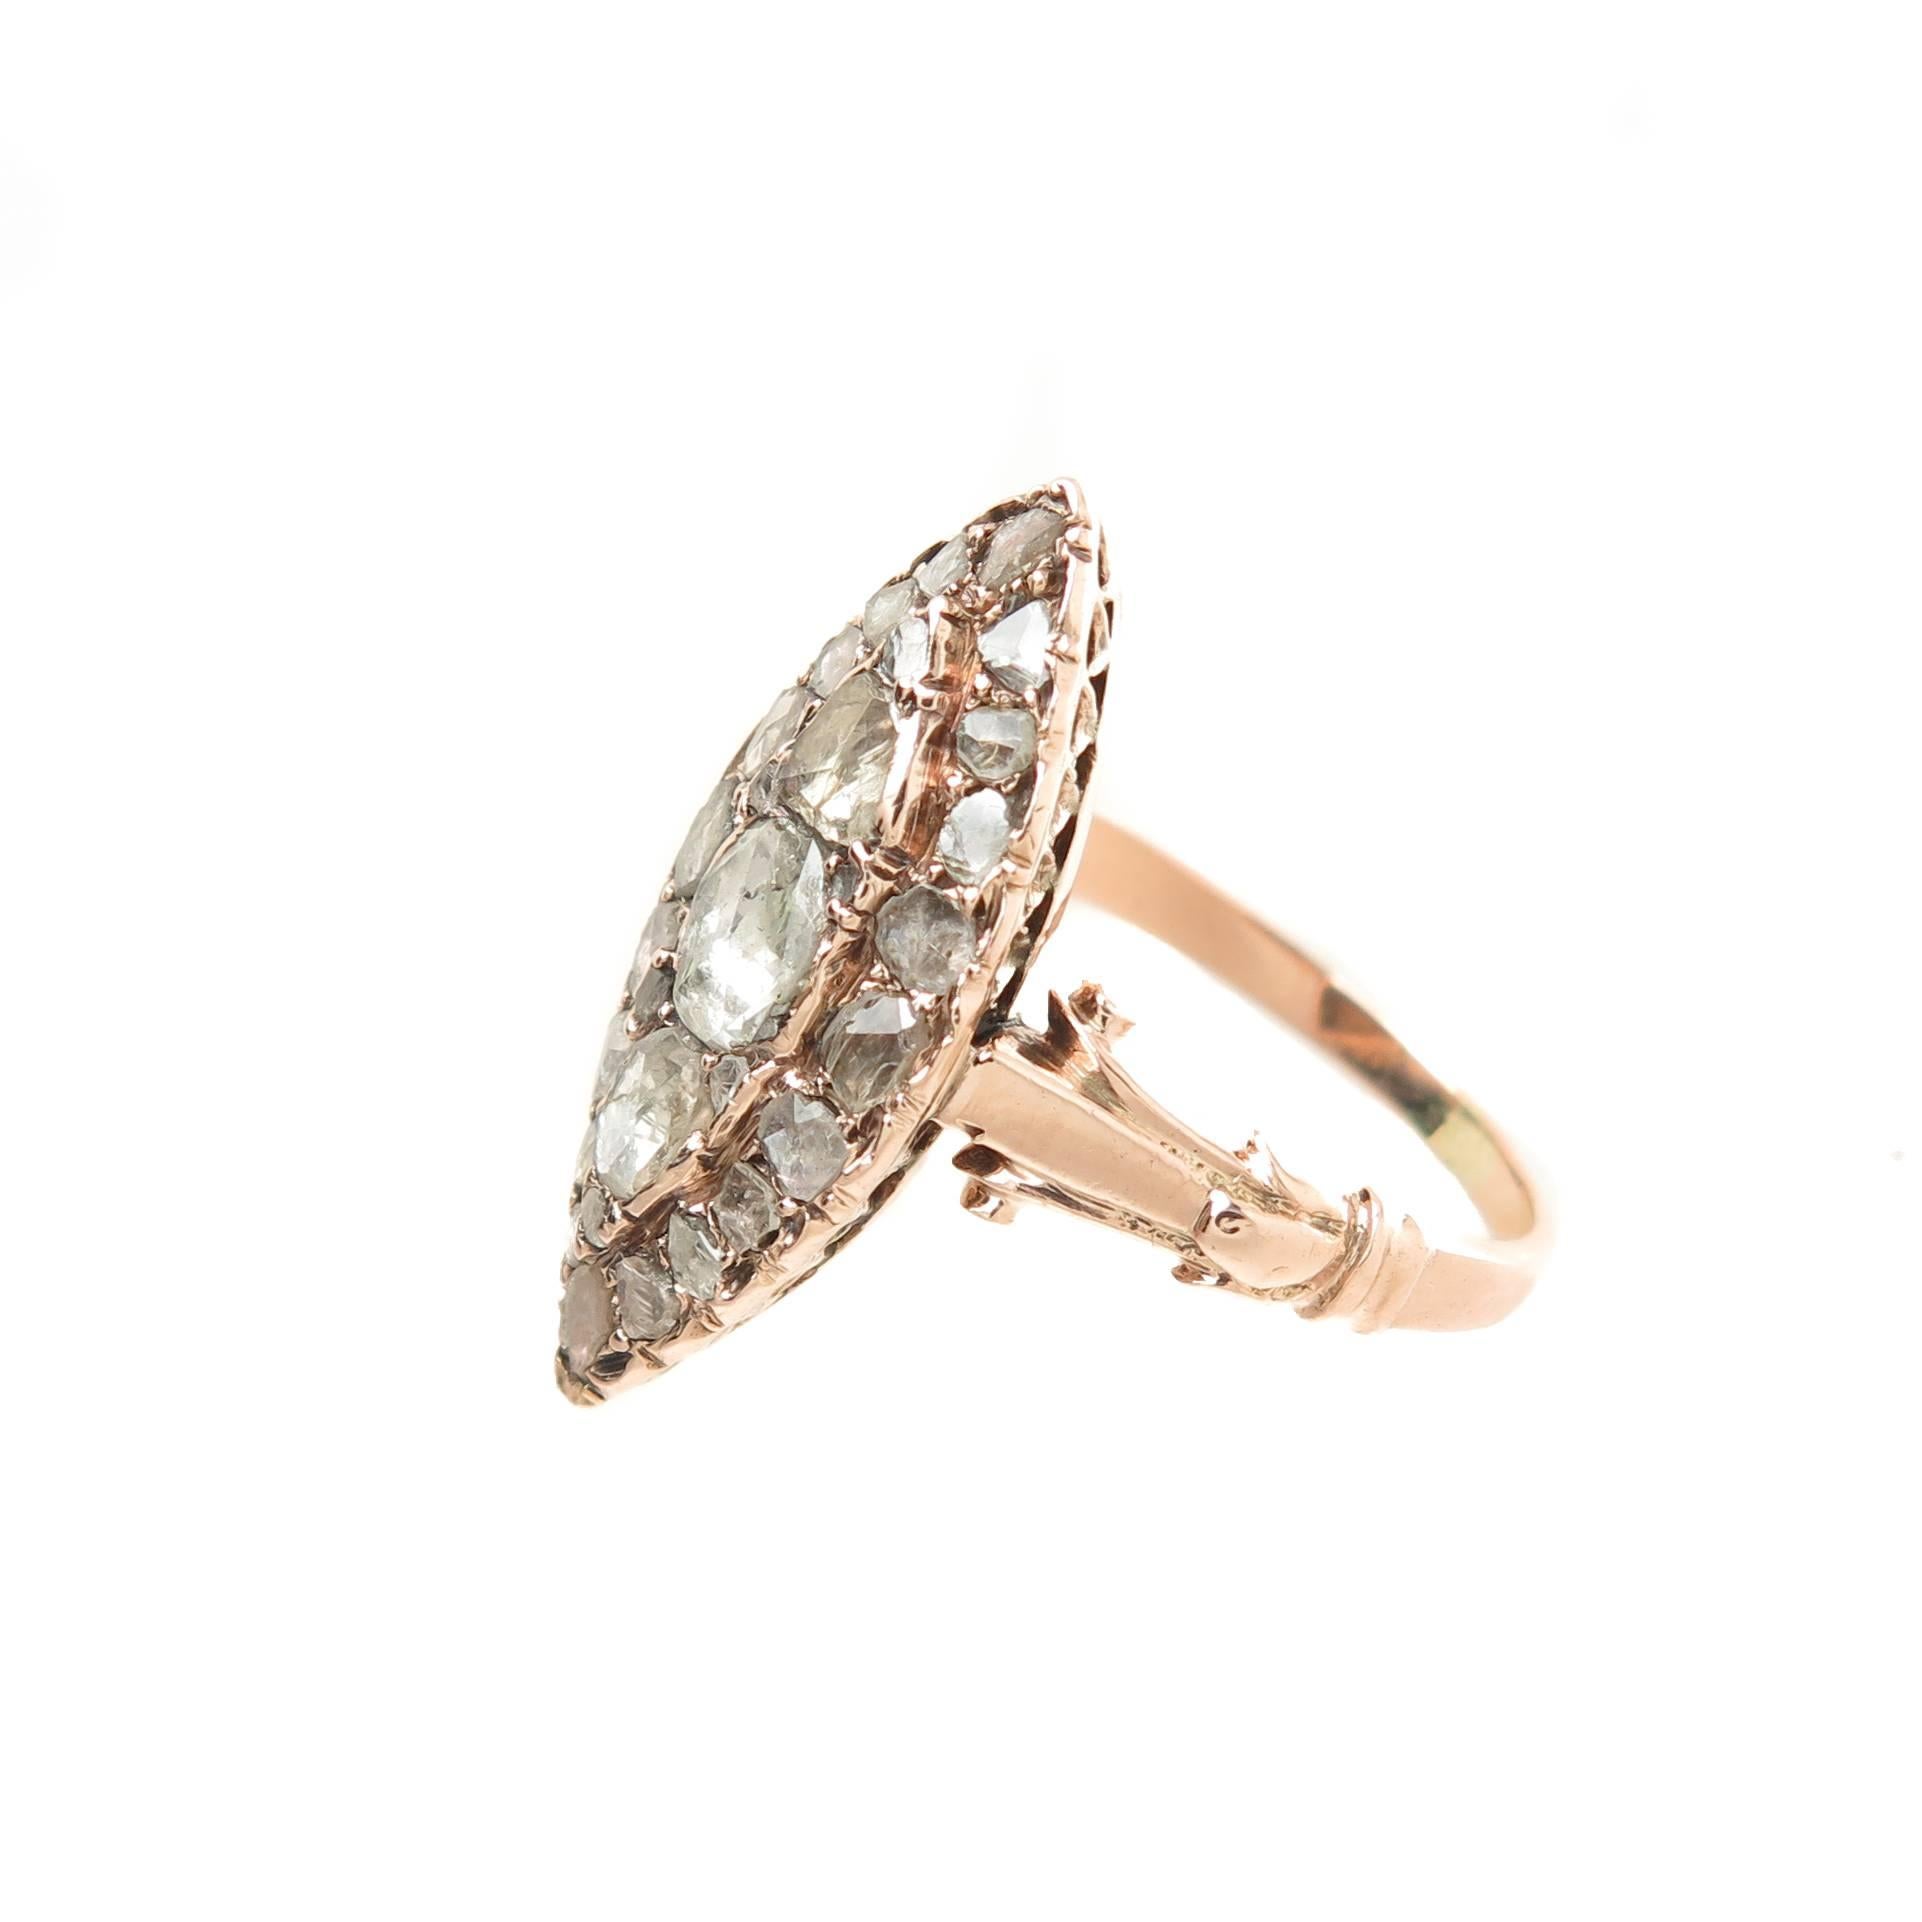 Circa 1850 Rose Gold Navette Ring, measuring 1 inch in length. Set with Rose Cut Diamonds in varying sizes totaling approximately 1.25 carats. Finger size 7. Excellent all original condition.  